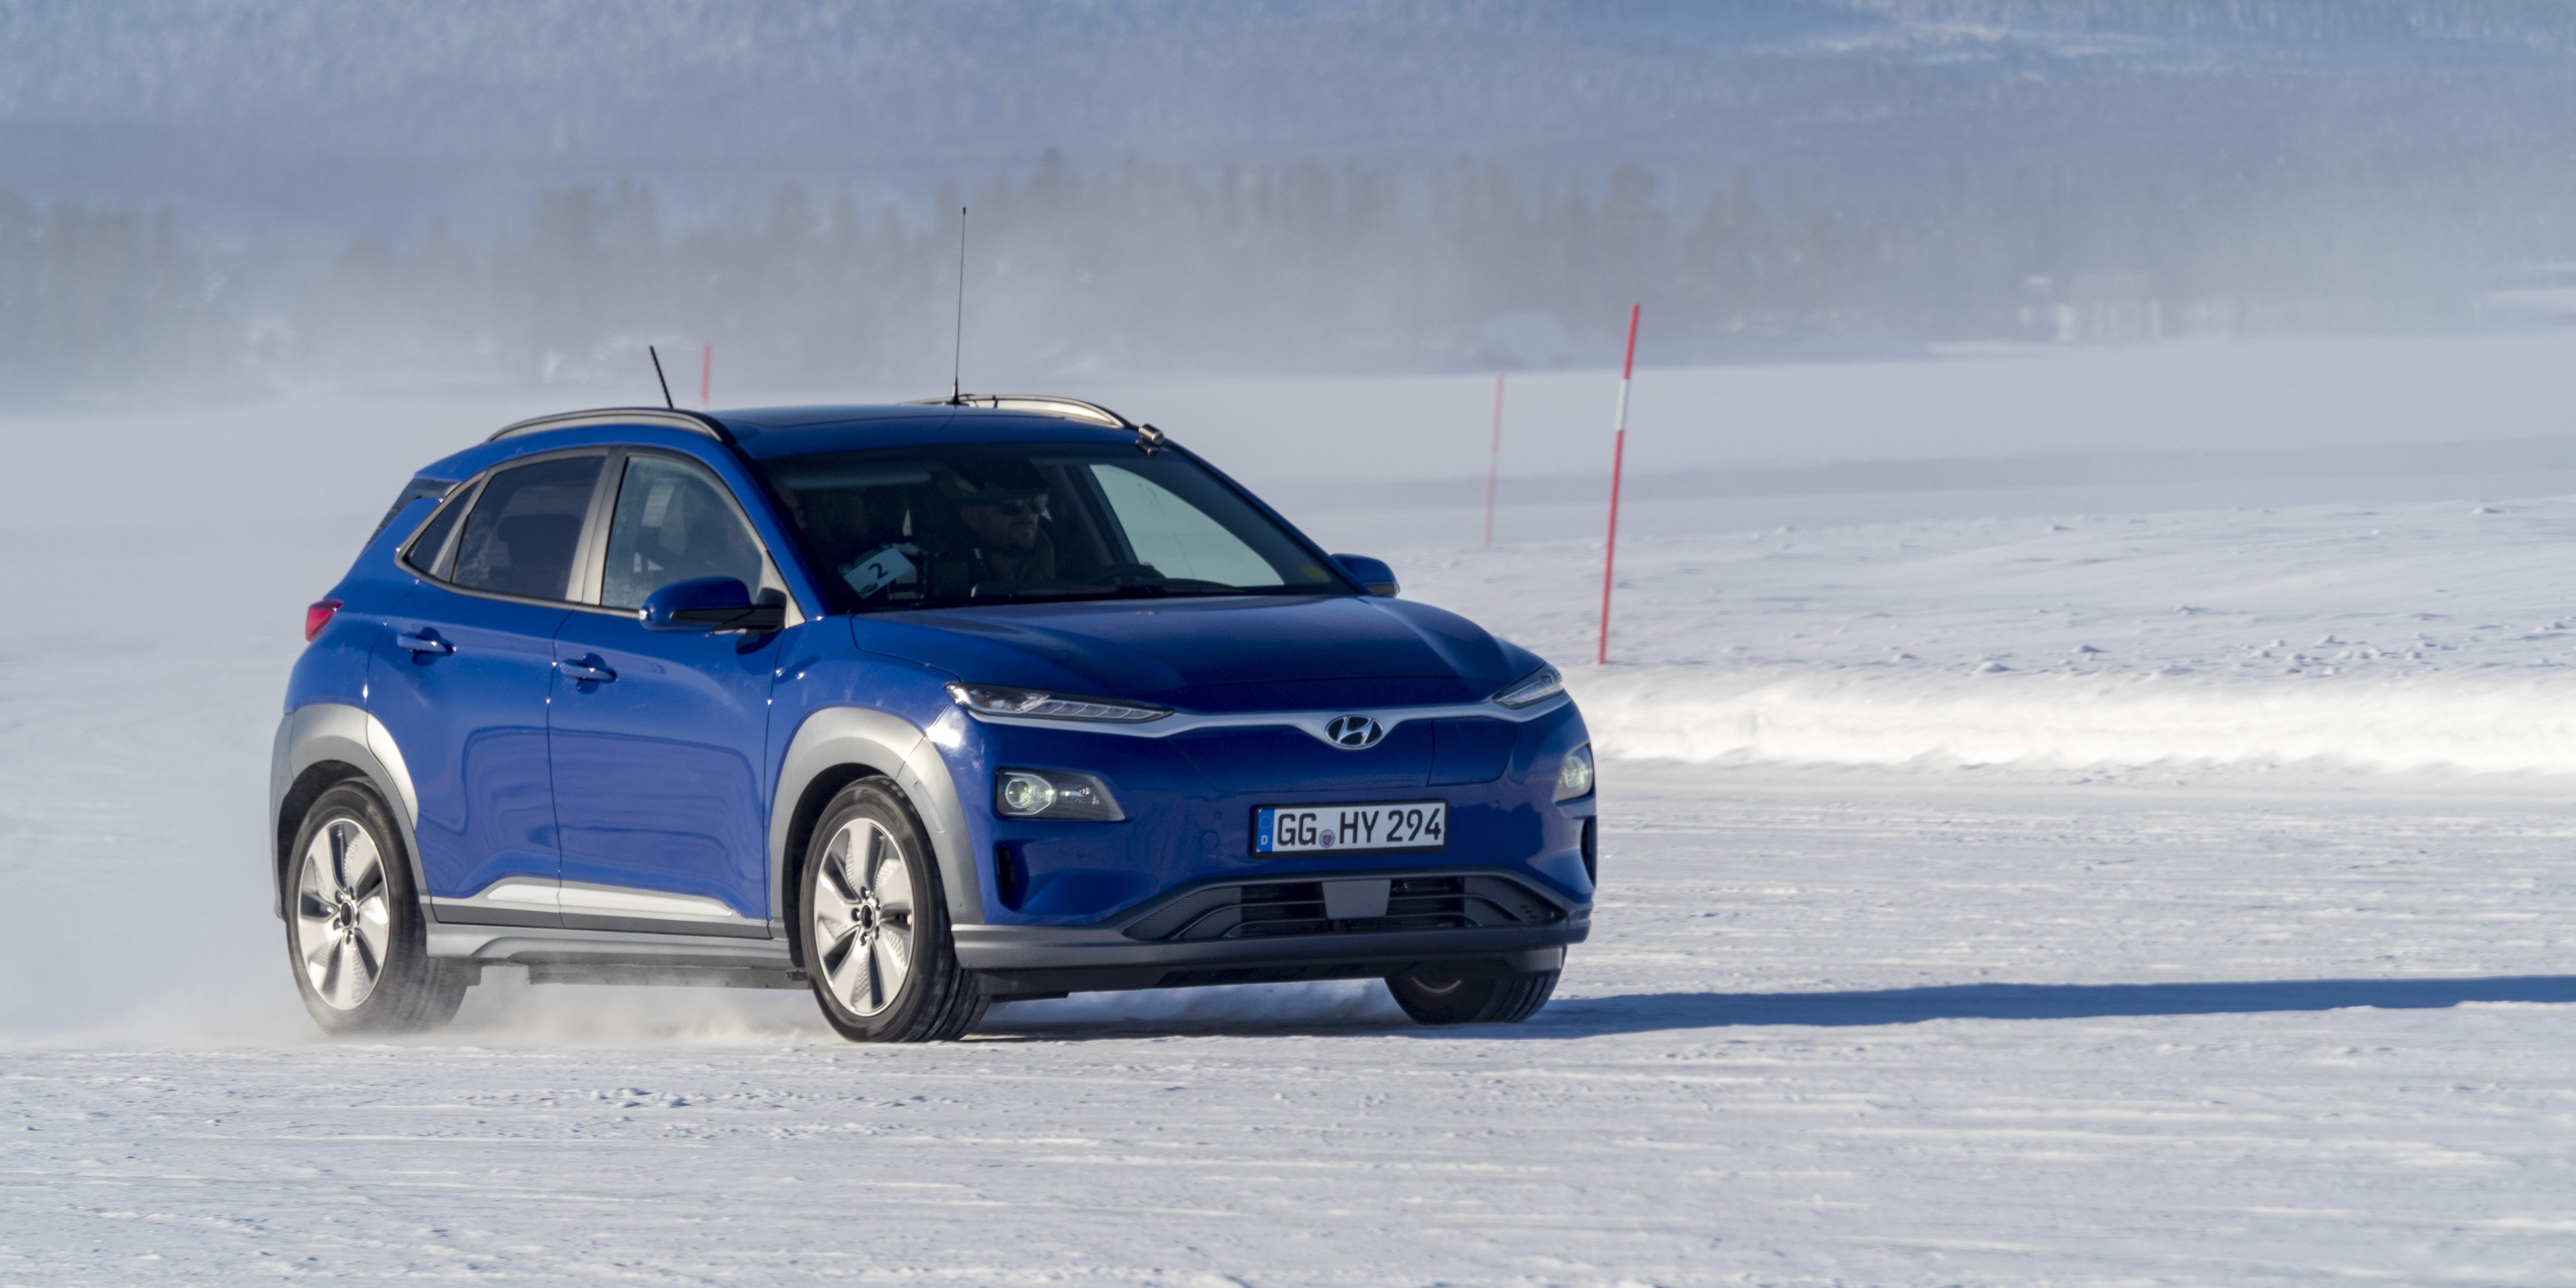 Hyundai talks about new Kona Electric and its cold weather